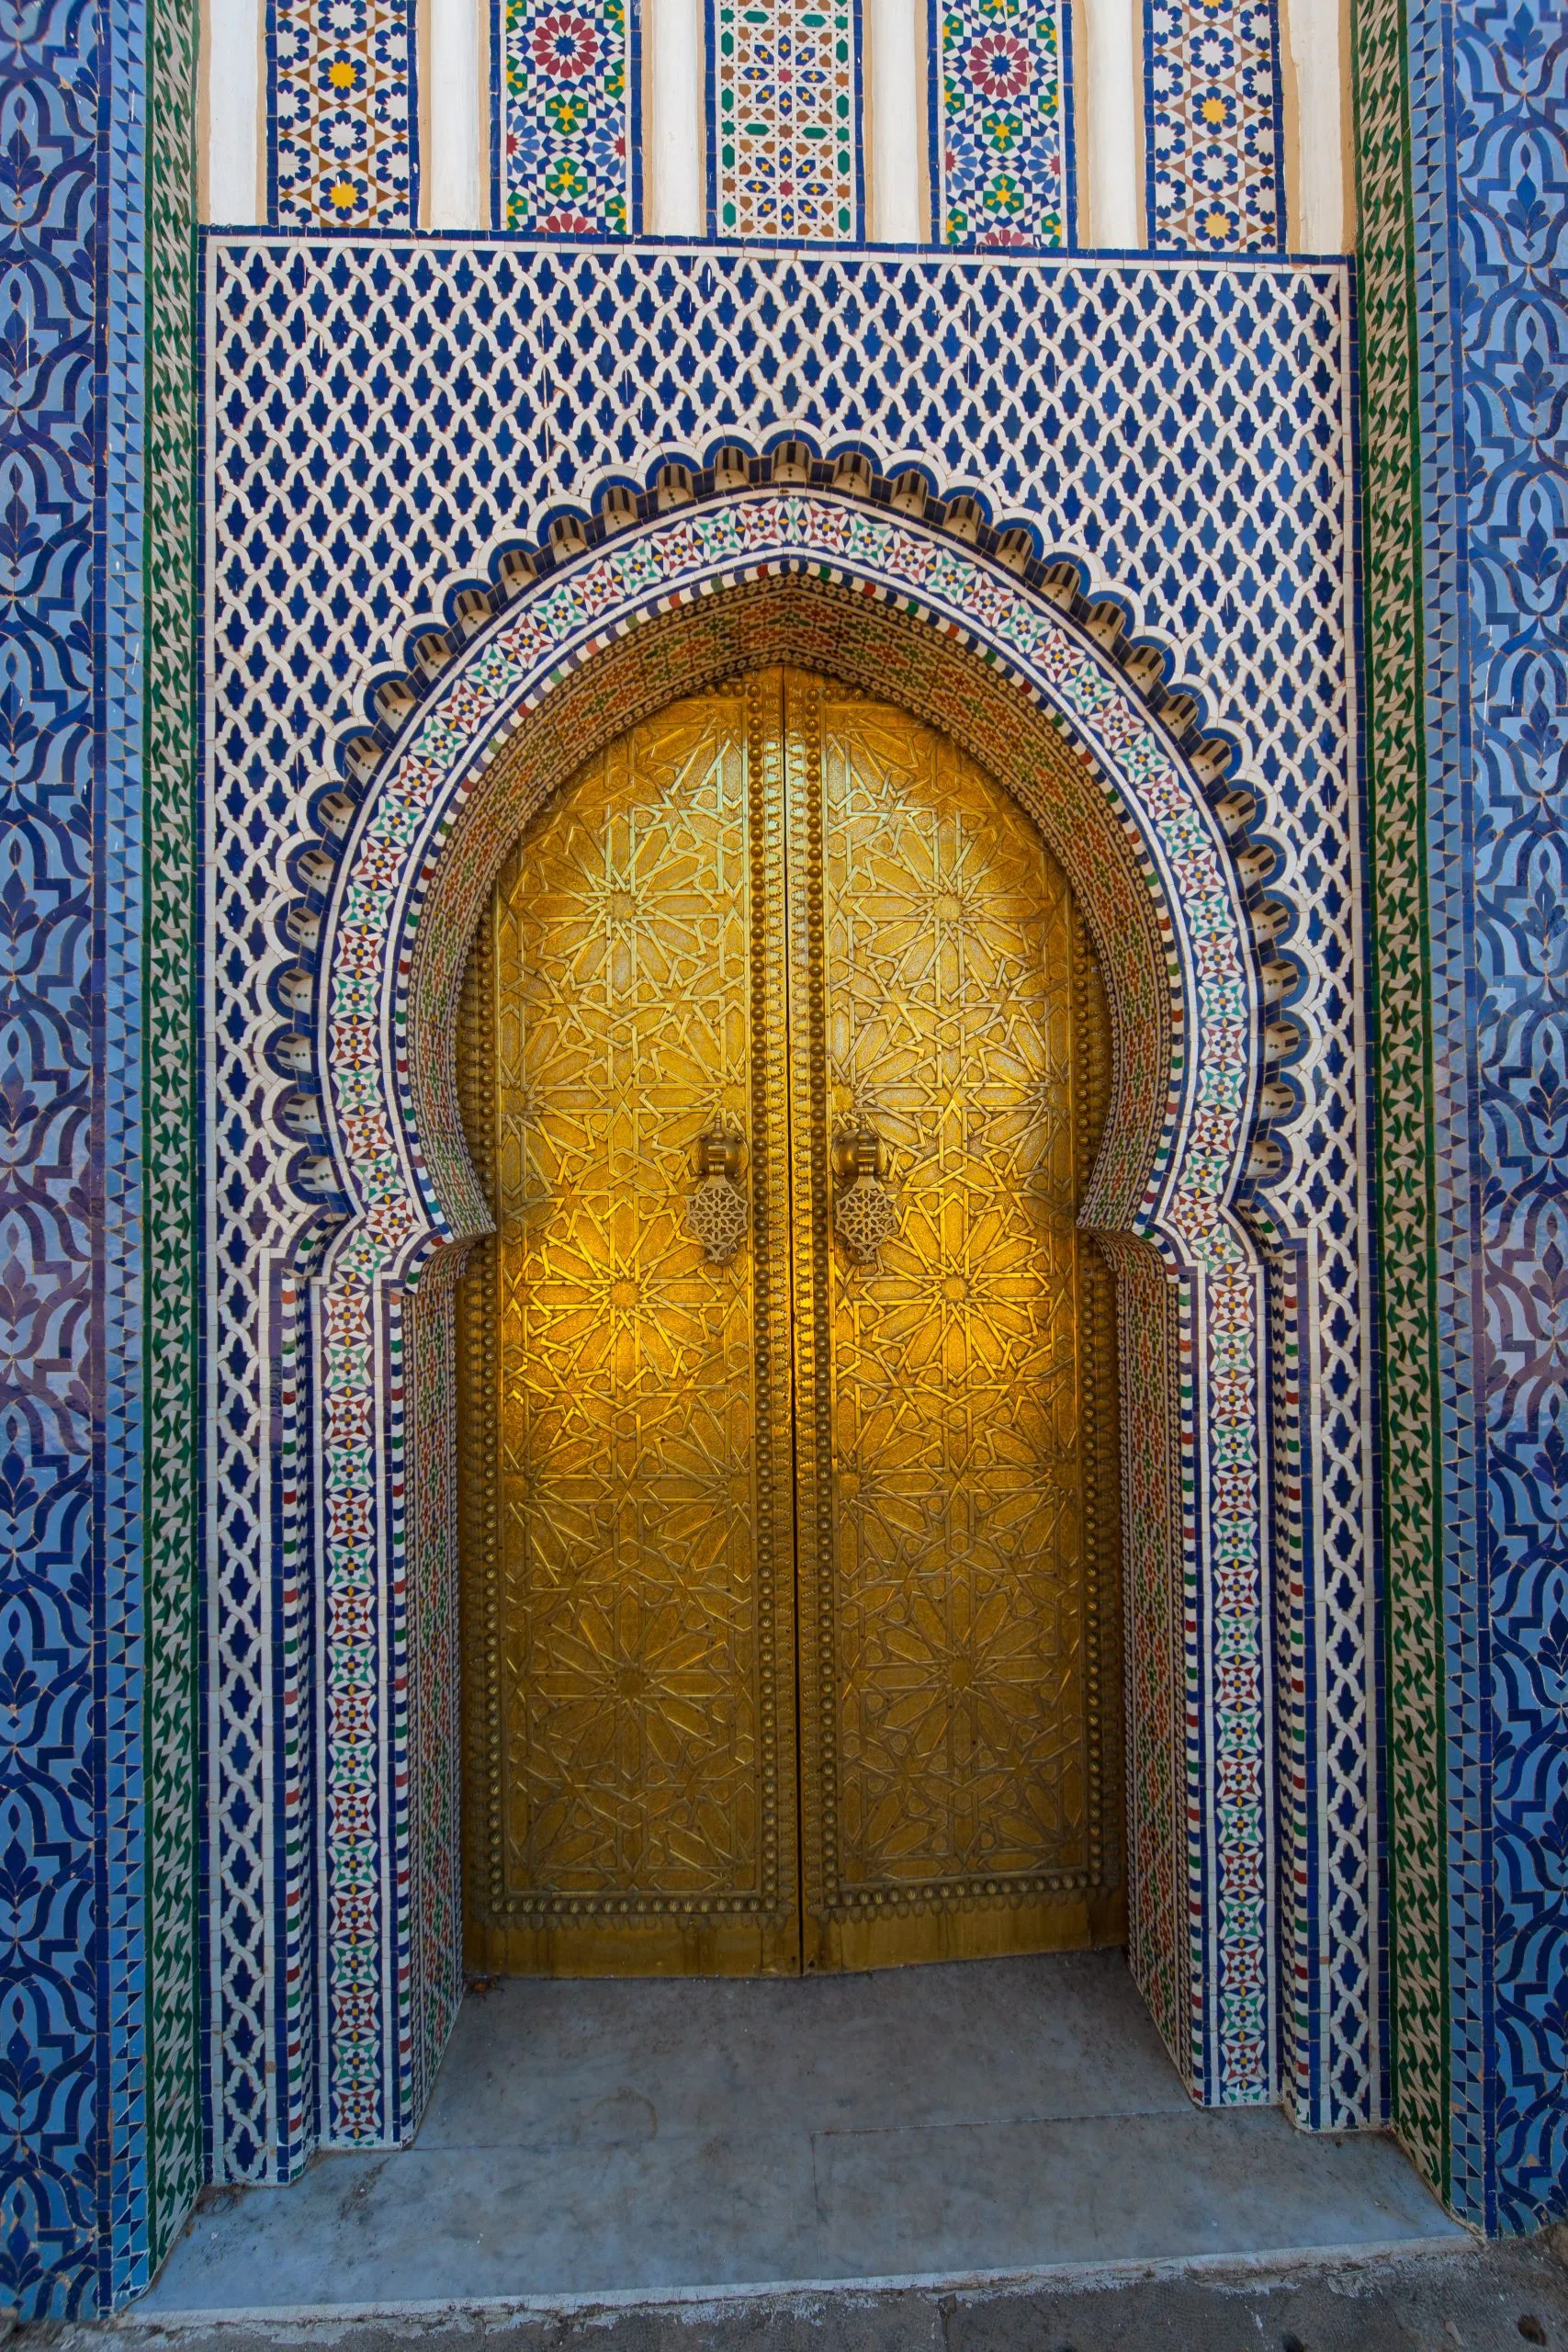 Gate of the Dar el Makhzen - The Royal Palace at Fes, Morocco